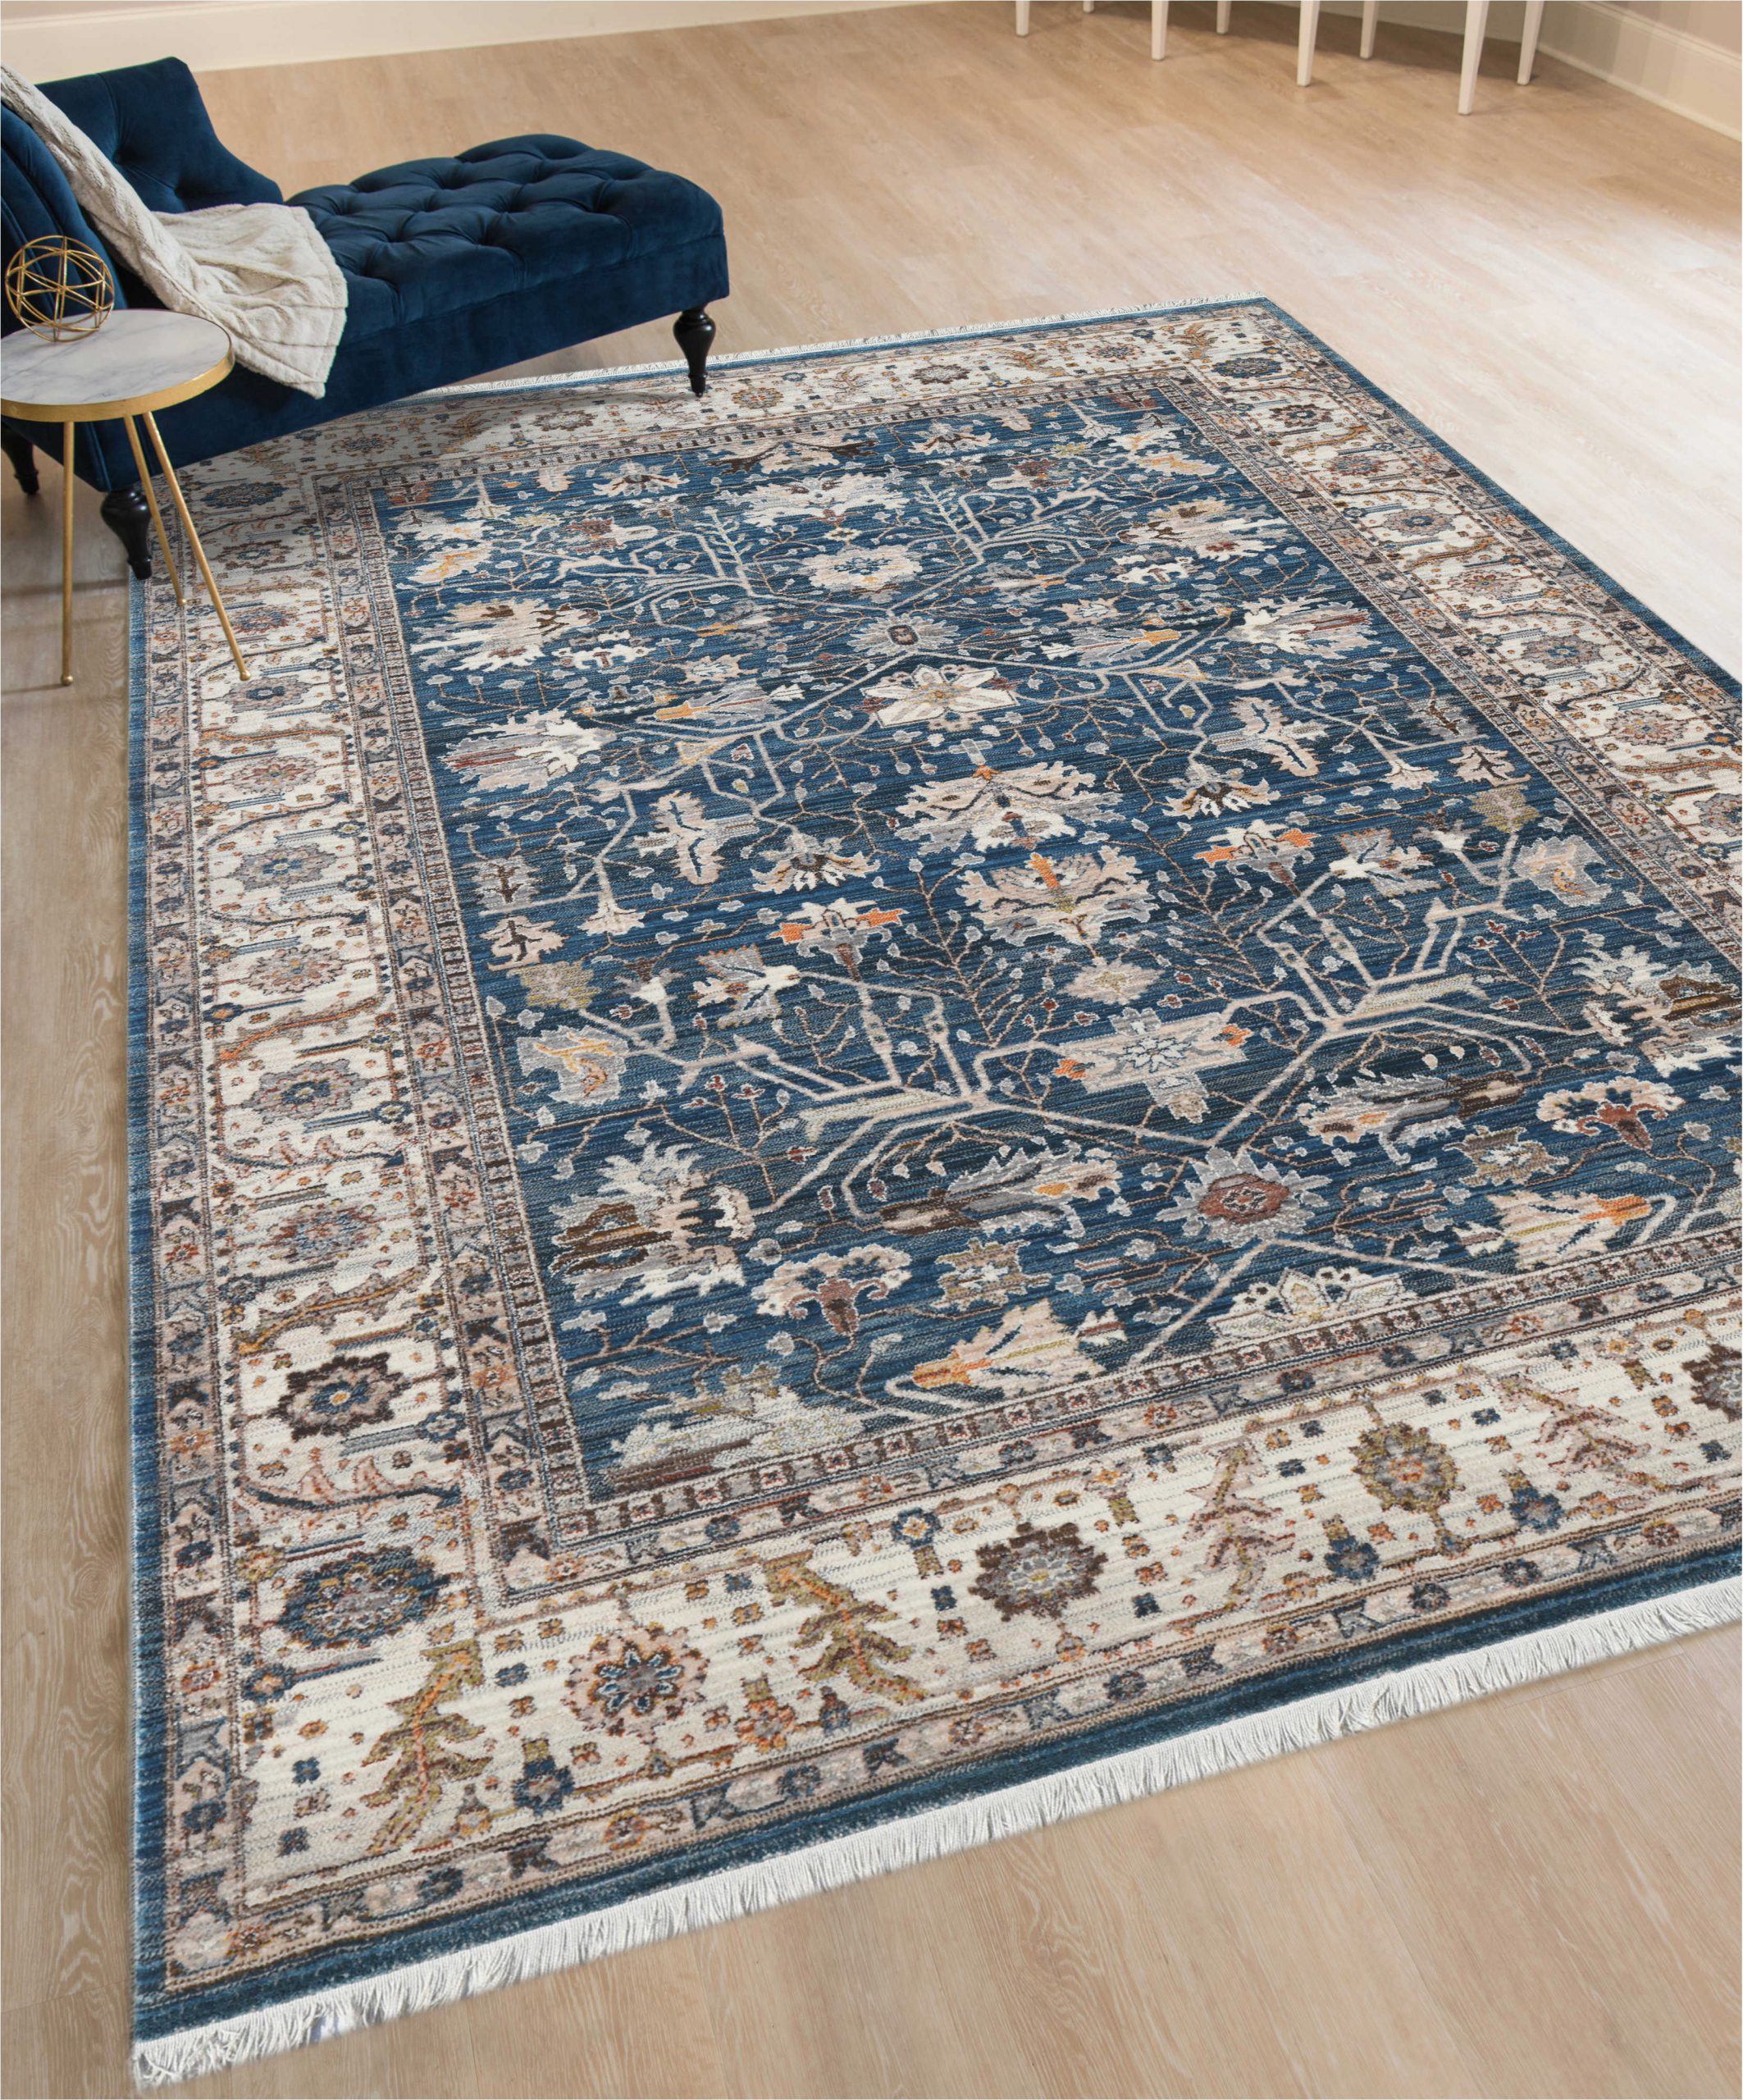 Area Rugs with Blue and Browns Blue and Brown area Rugs